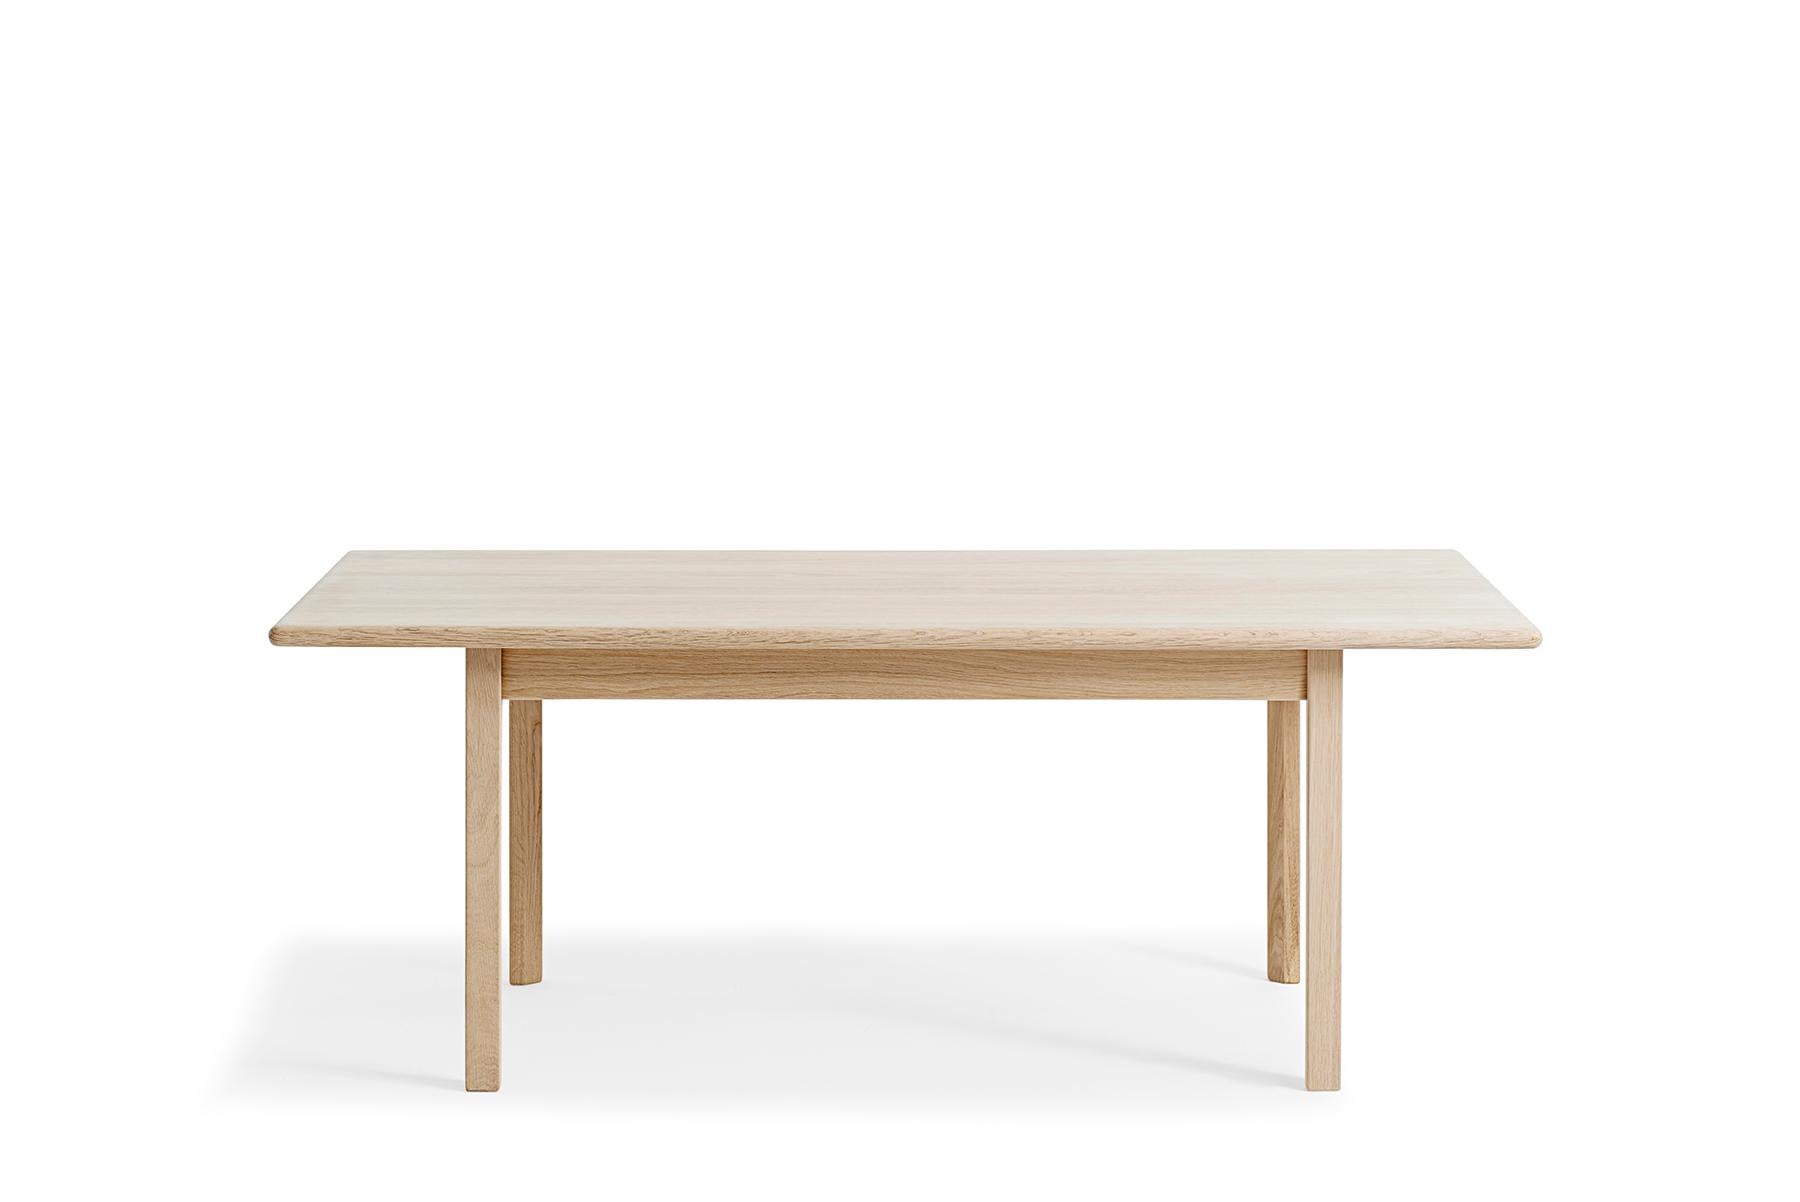 Designed by Hans Wegner for GETAMA in 1980, the 81/87 coffee table features unparalleled craftsmanship. This table is hand built at GETAMA’s factory in Gedsted, Denmark by skilled cabinetmakers using traditional Scandinavian techniques.

Lead